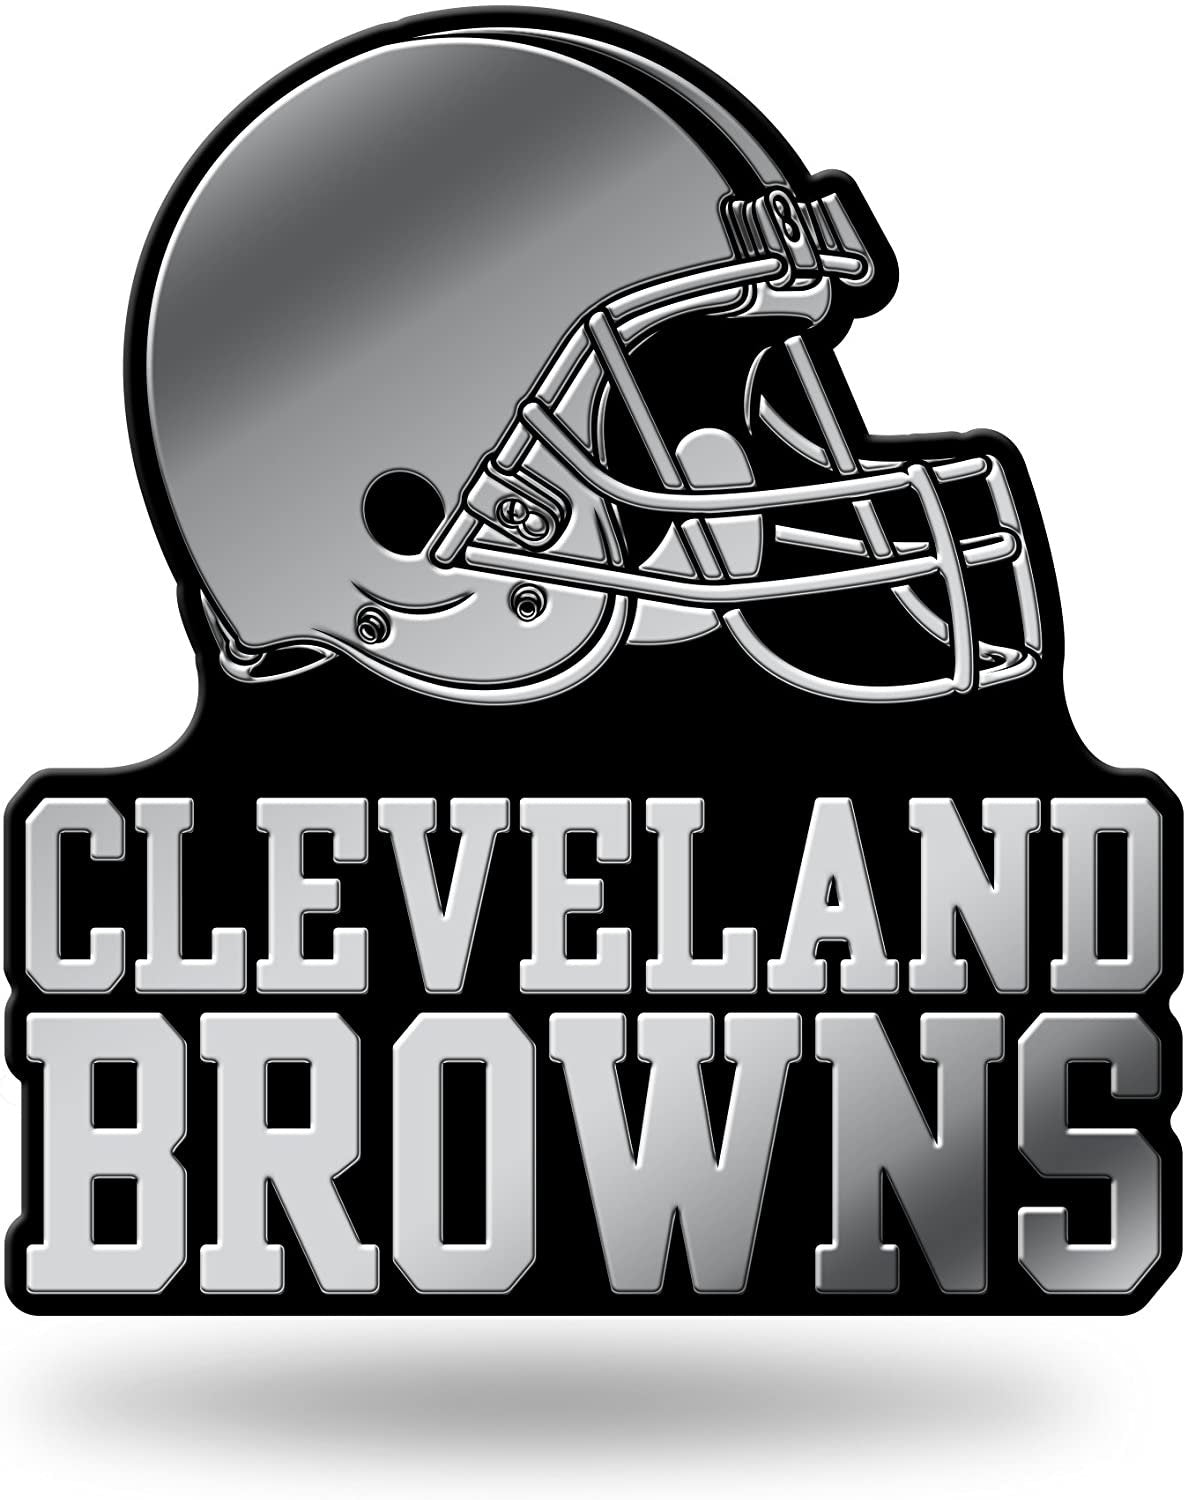 Cleveland Browns Auto Emblem, Silver Chrome Color, Raised Molded Plastic, 3.5 Inch, Adhesive Tape Backing